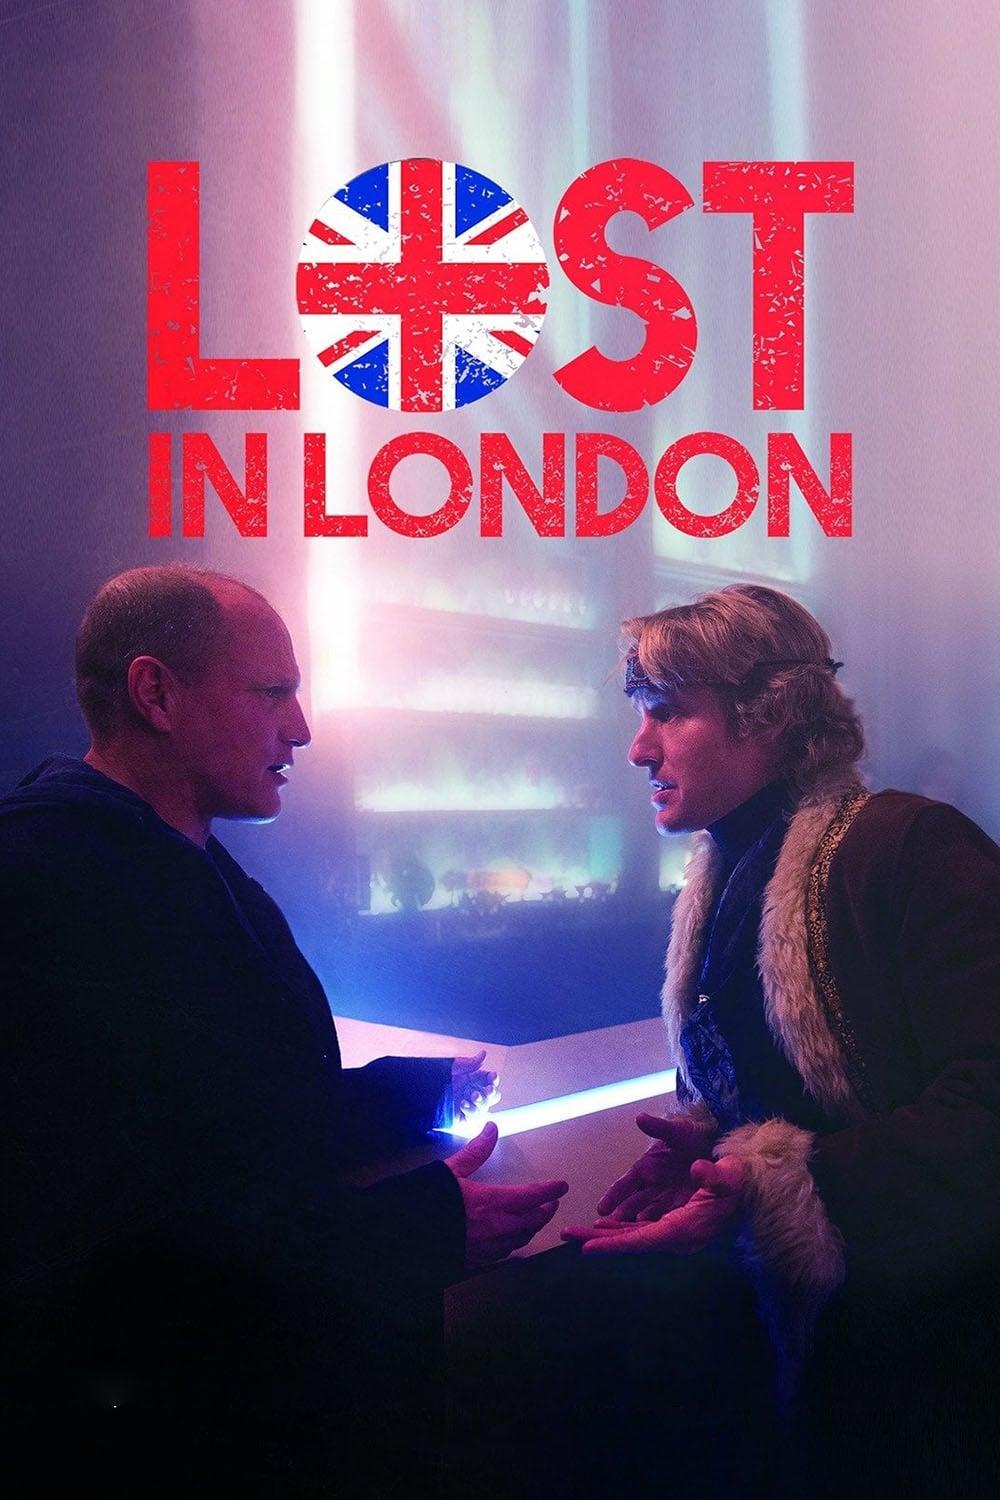 Lost in London poster